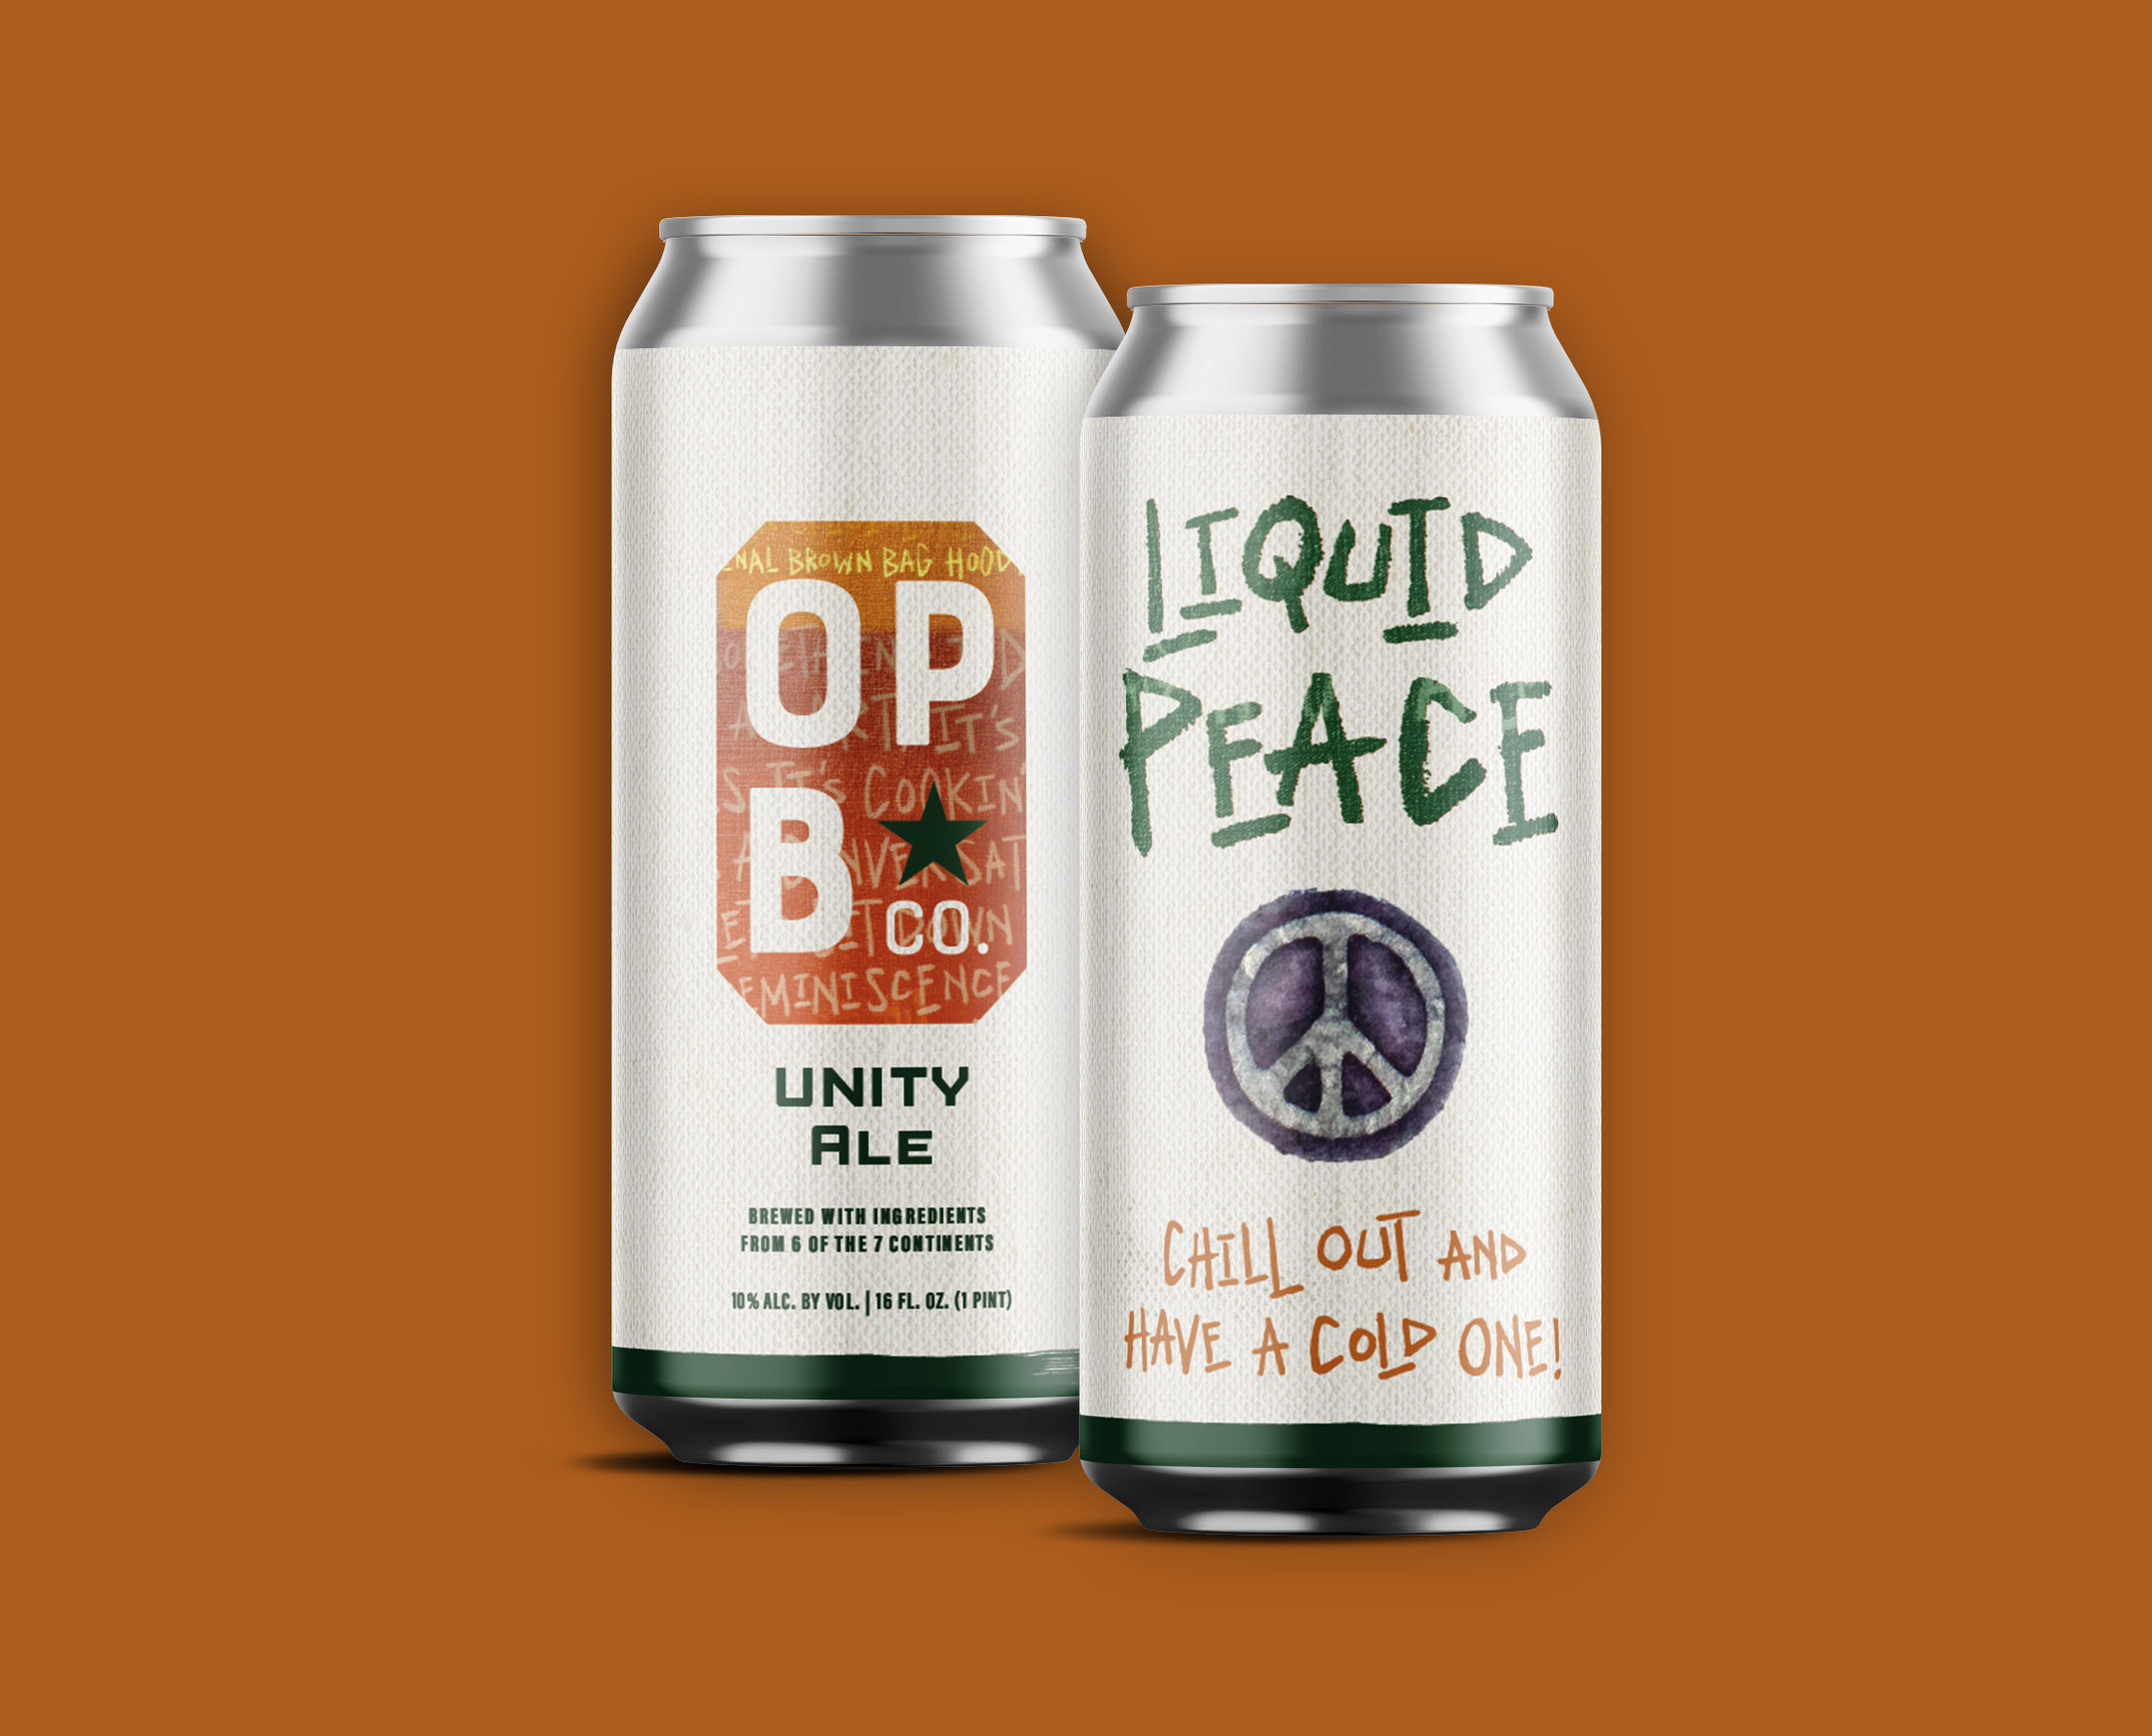 Digital rendering, of liquid peace unity ale beer can. 2 cans